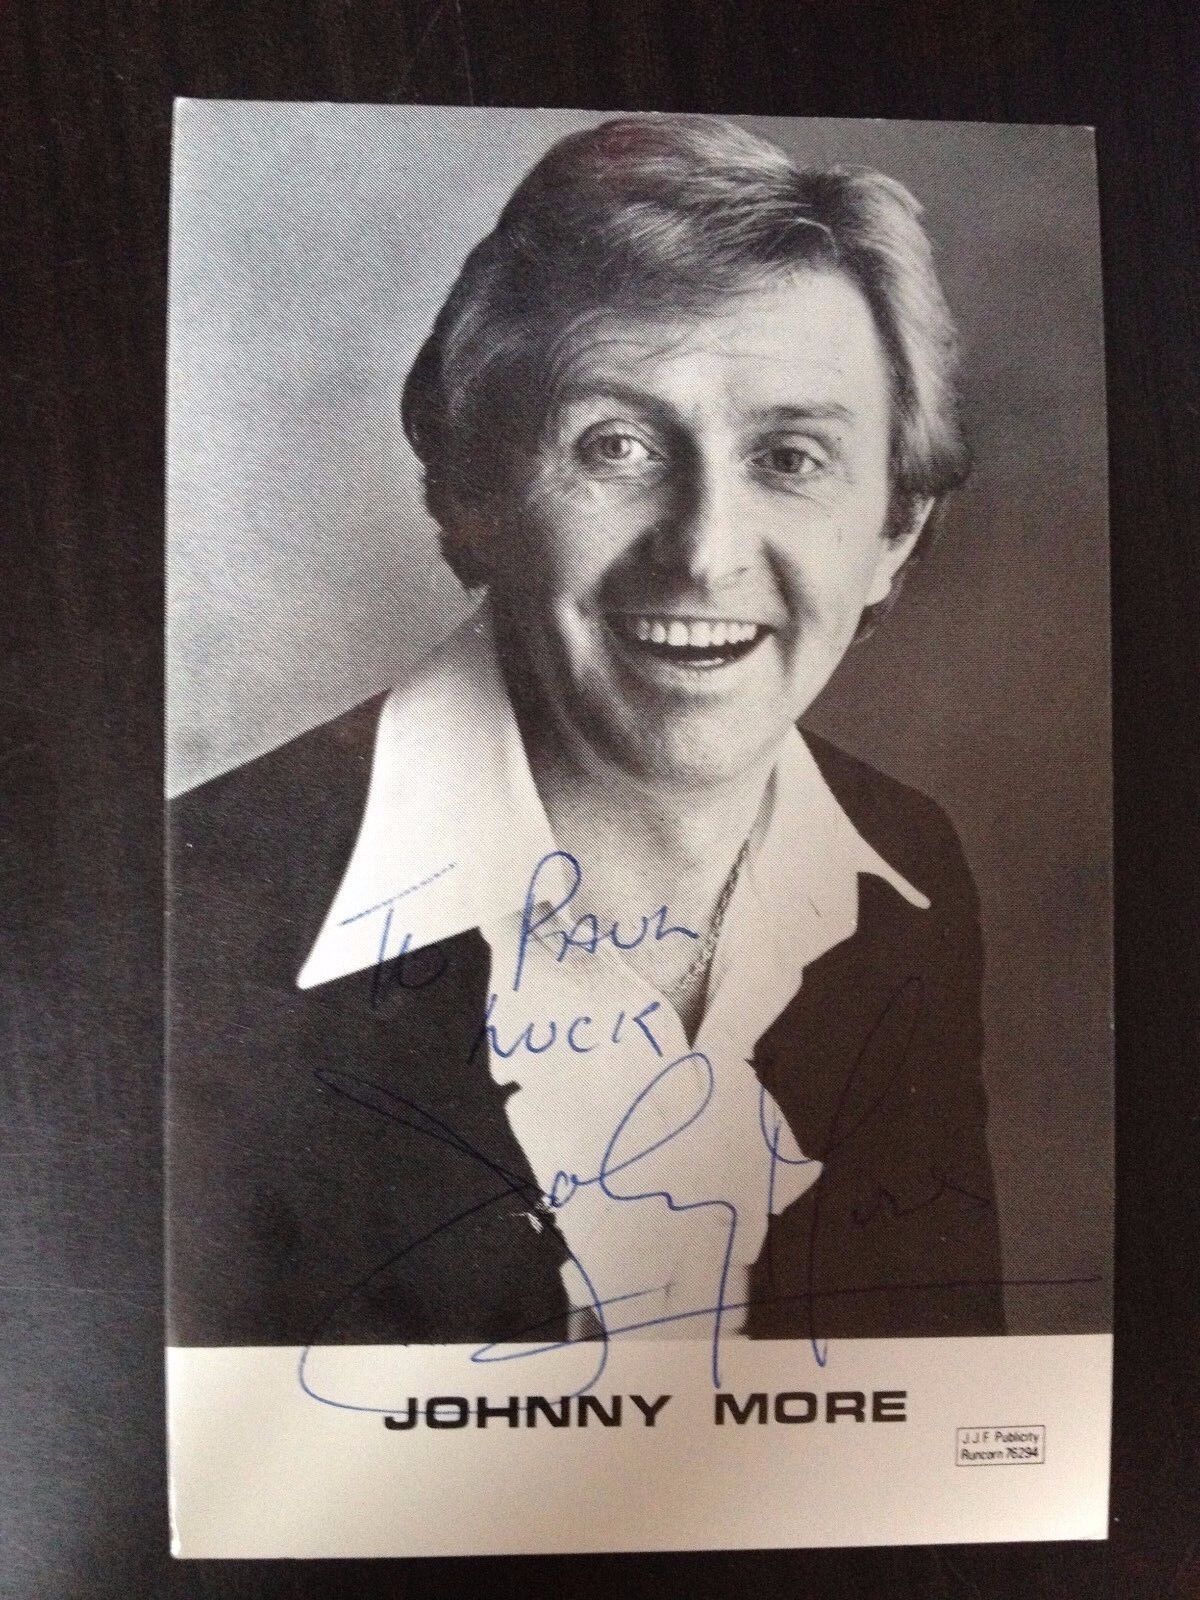 JOHNNY MORE - LATE GREAT COMEDY ENTERTAINER - SIGNED B/W Photo Poster paintingGRAPH